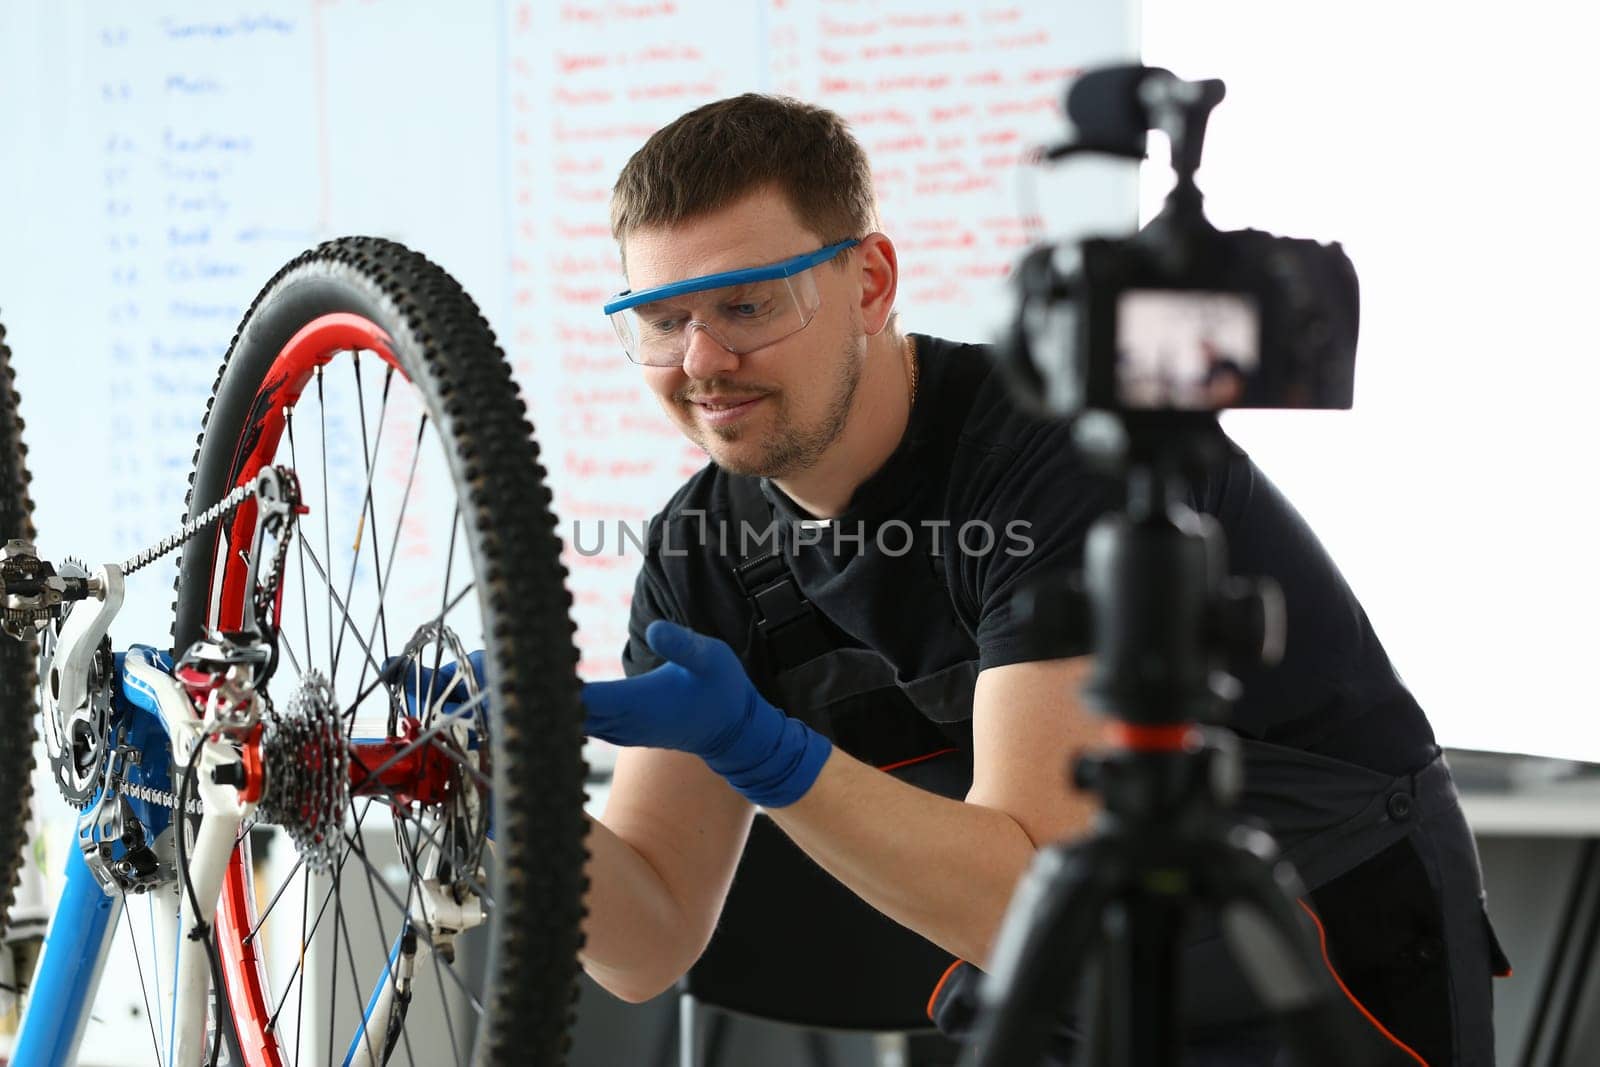 Master blogger takes video maintenance of bicycles repairs and upgrades. Remote bike repair and helpful blog